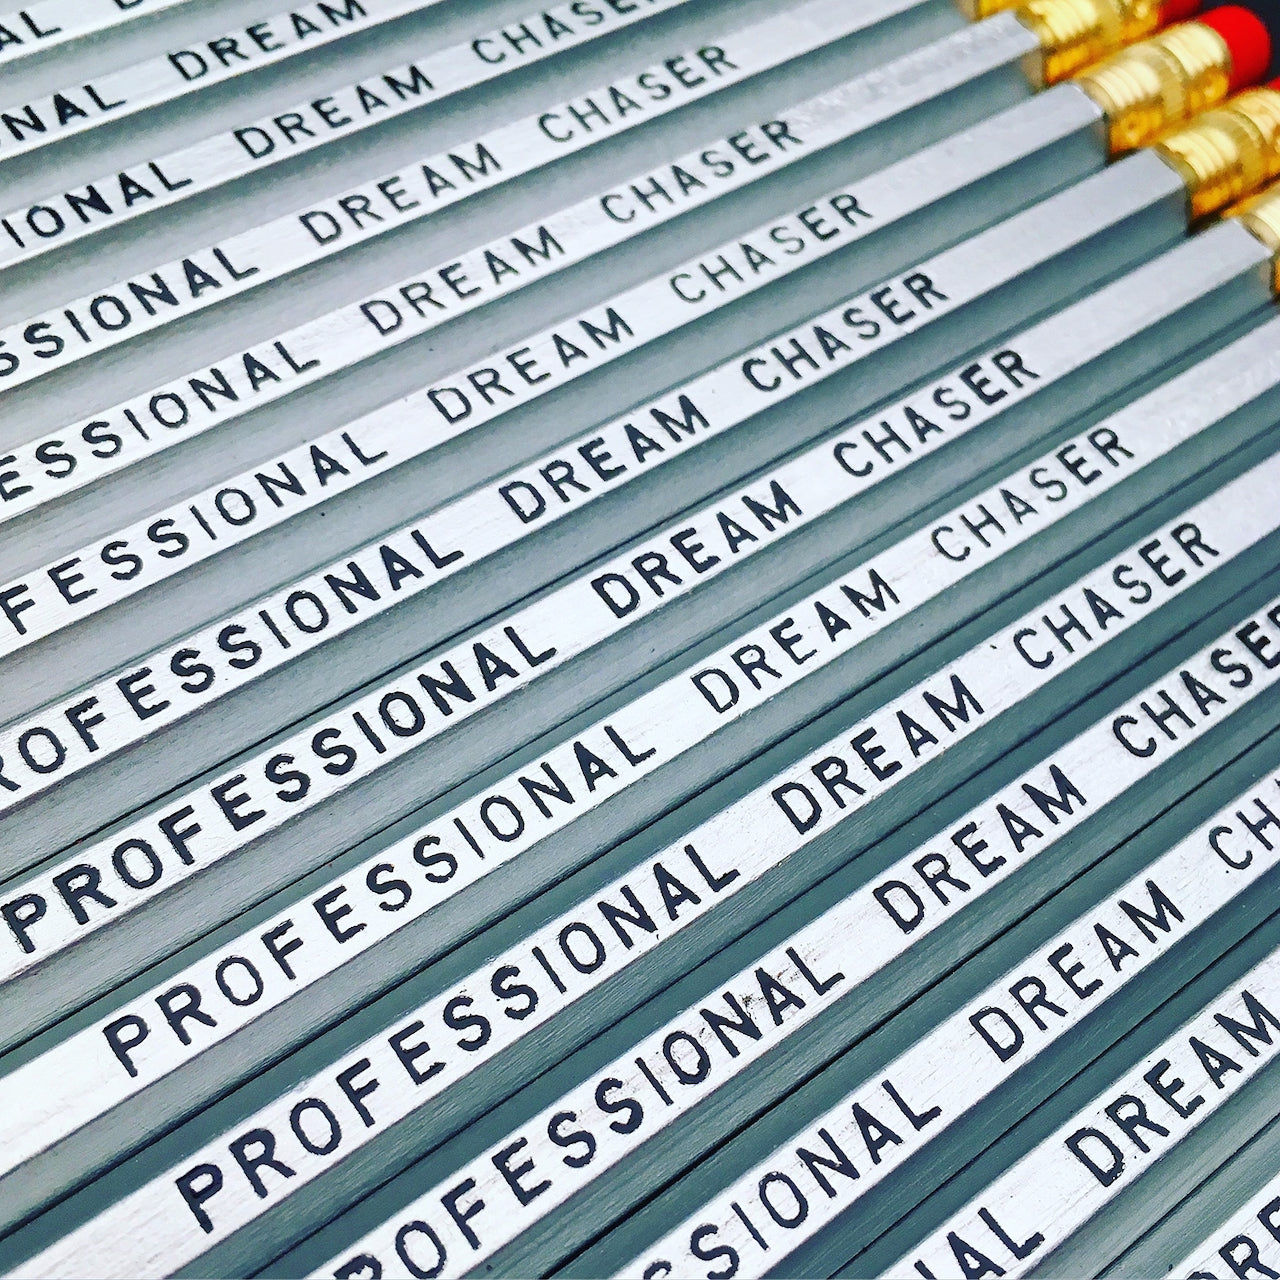 PROFESSIONAL DREAM CHASER PENCIL SET